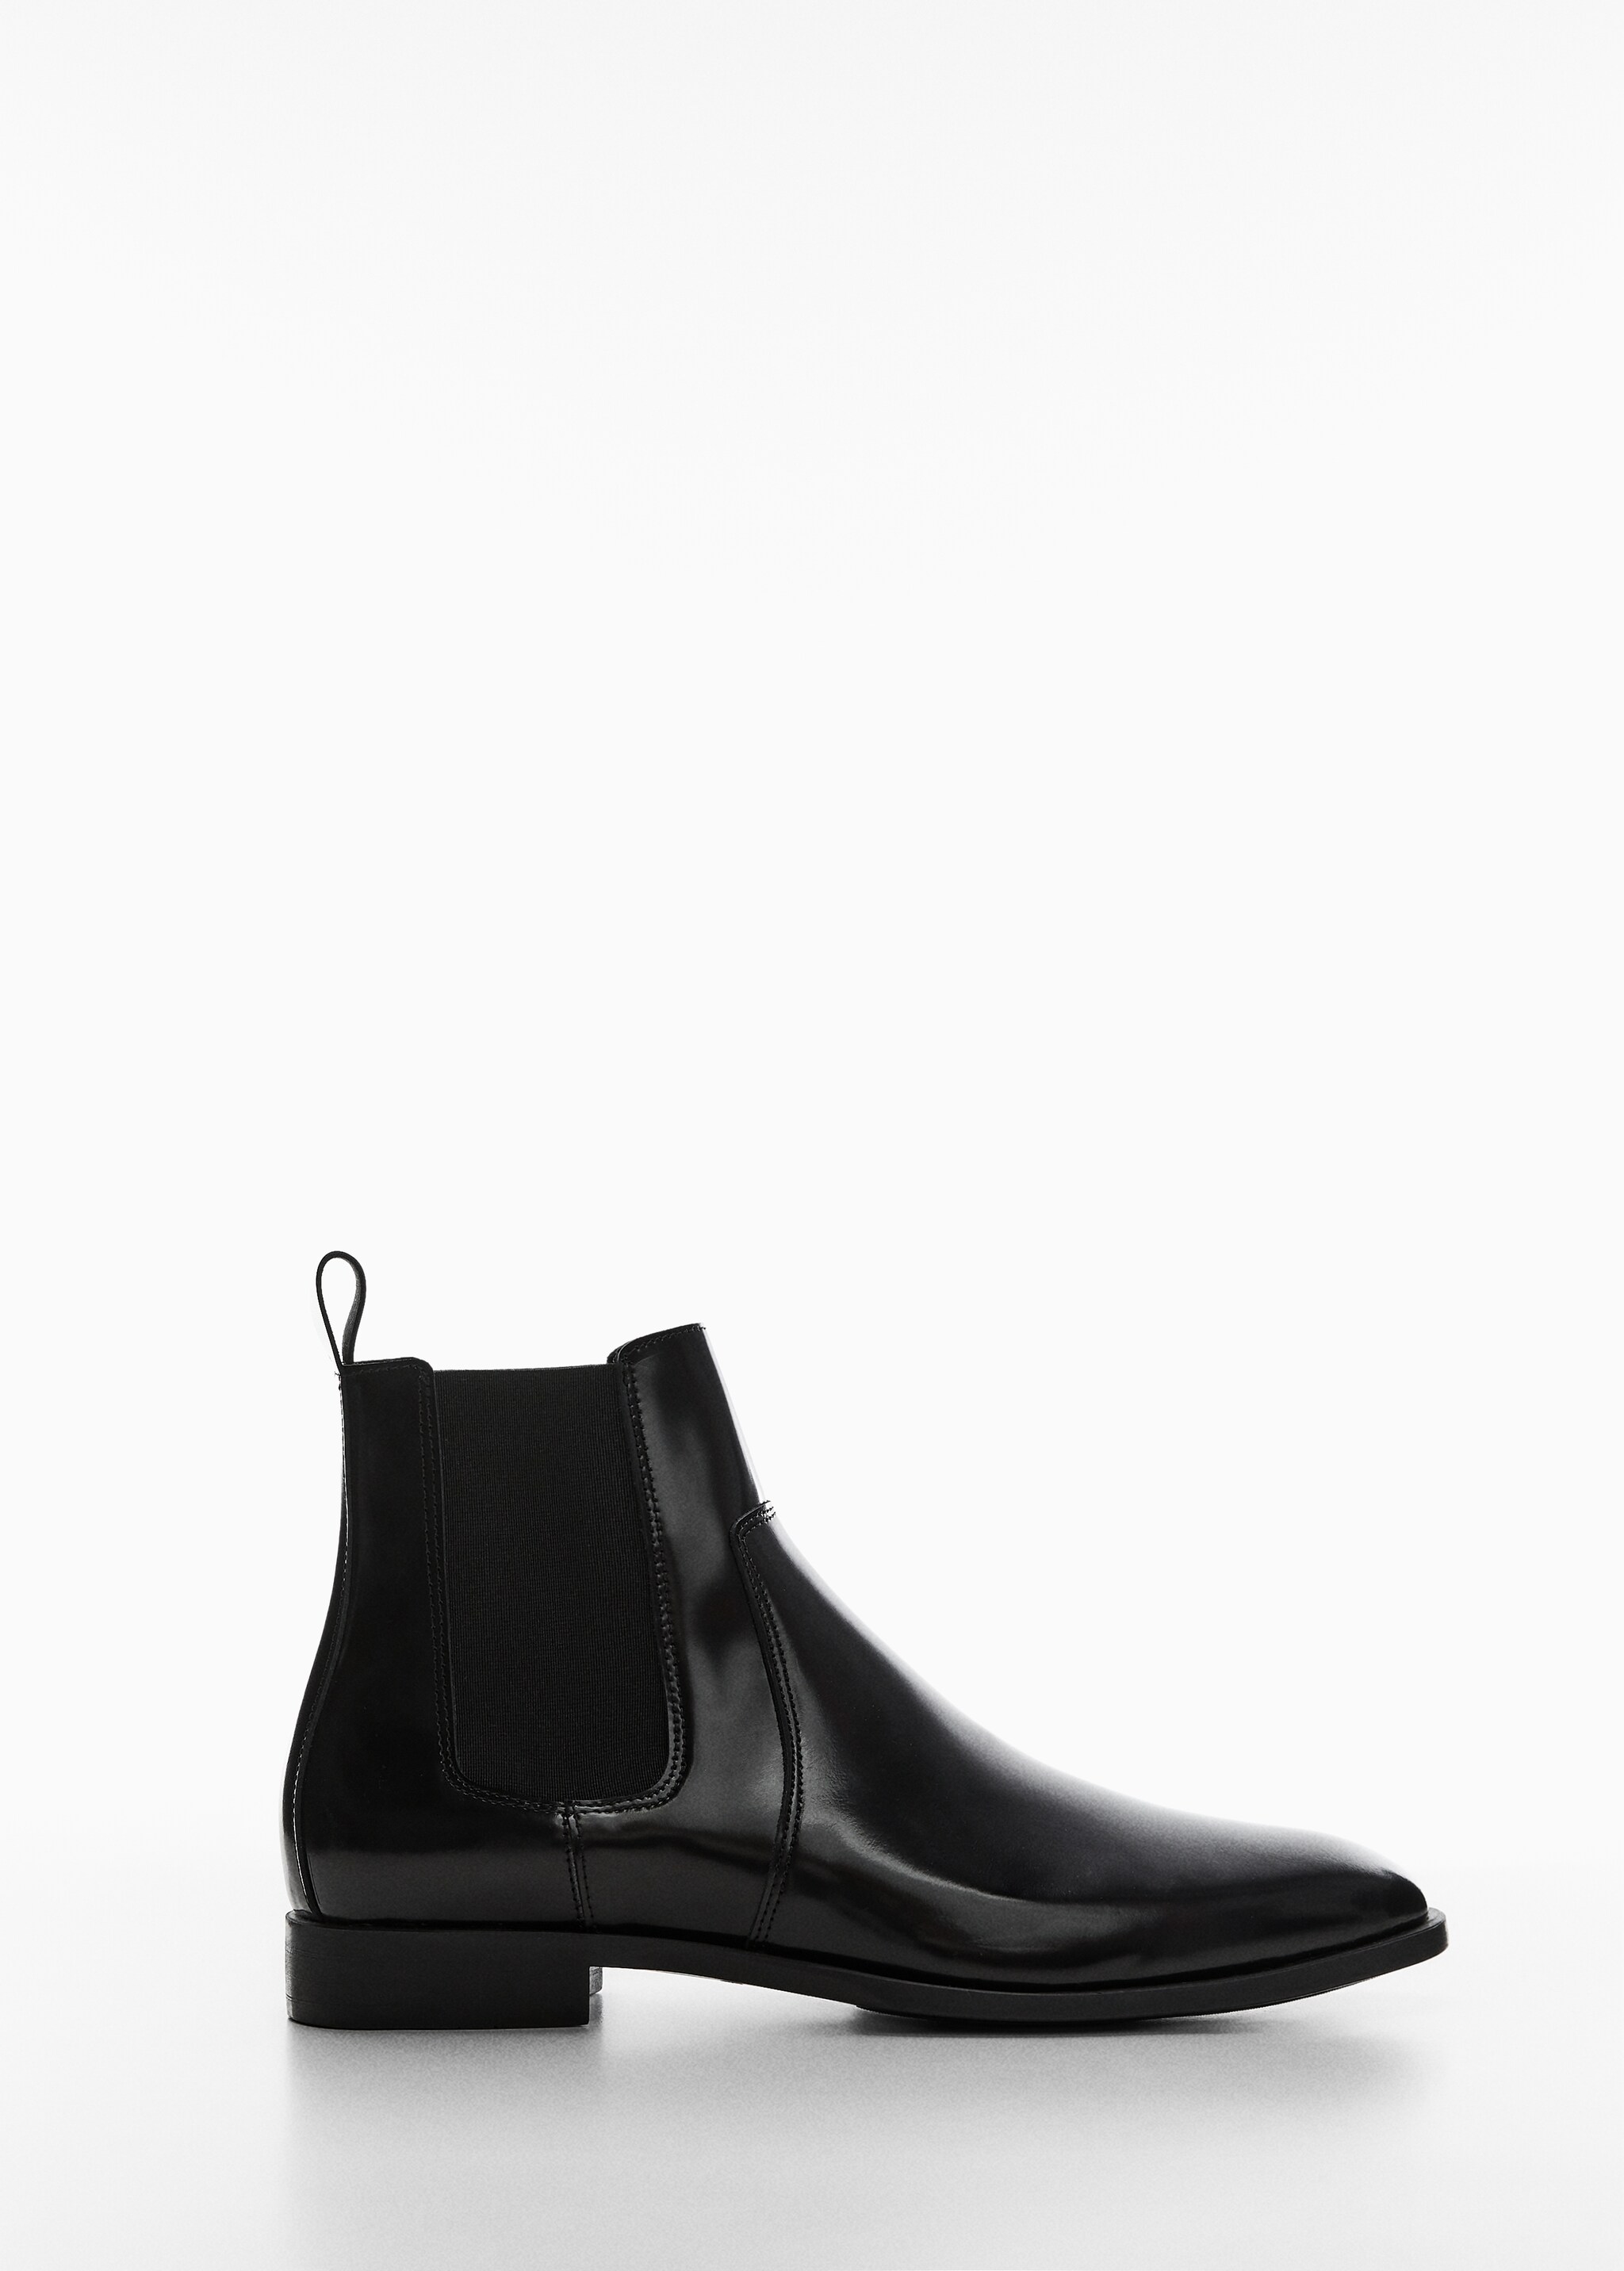 Polished leather chelsea boots - Article without model